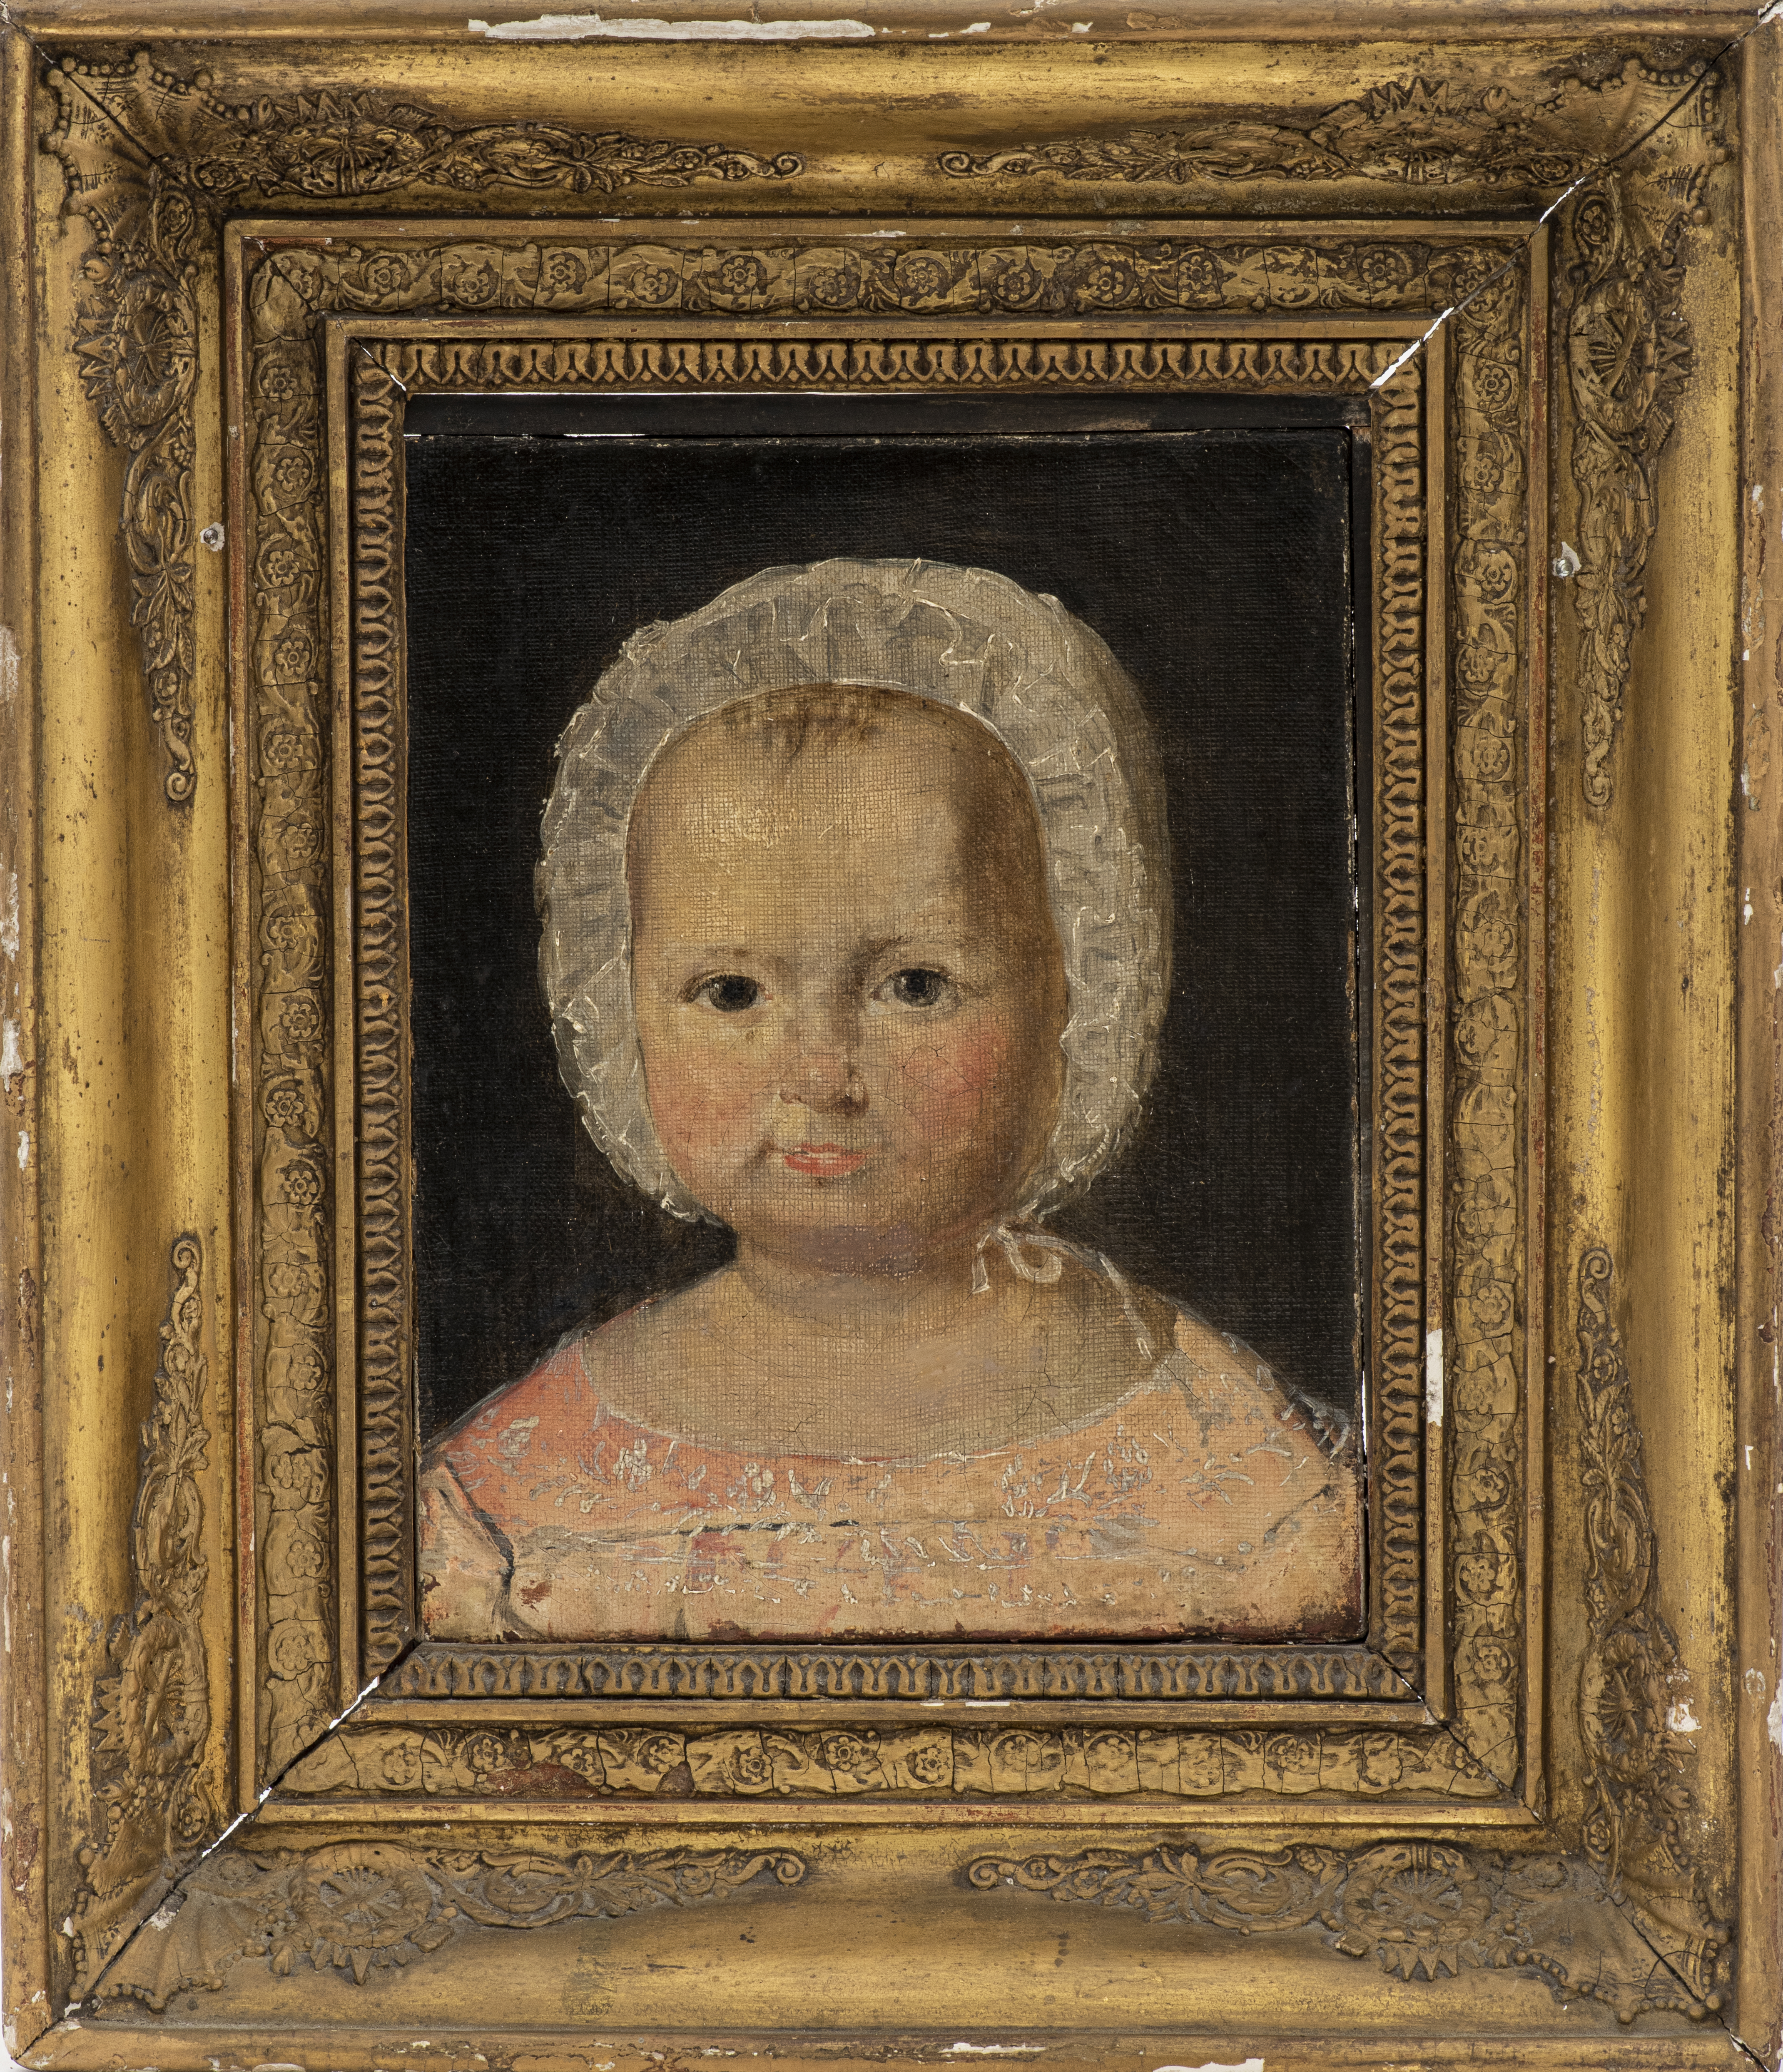 EARLY 19TH C FRENCH PORTRAIT OF 2d25fa